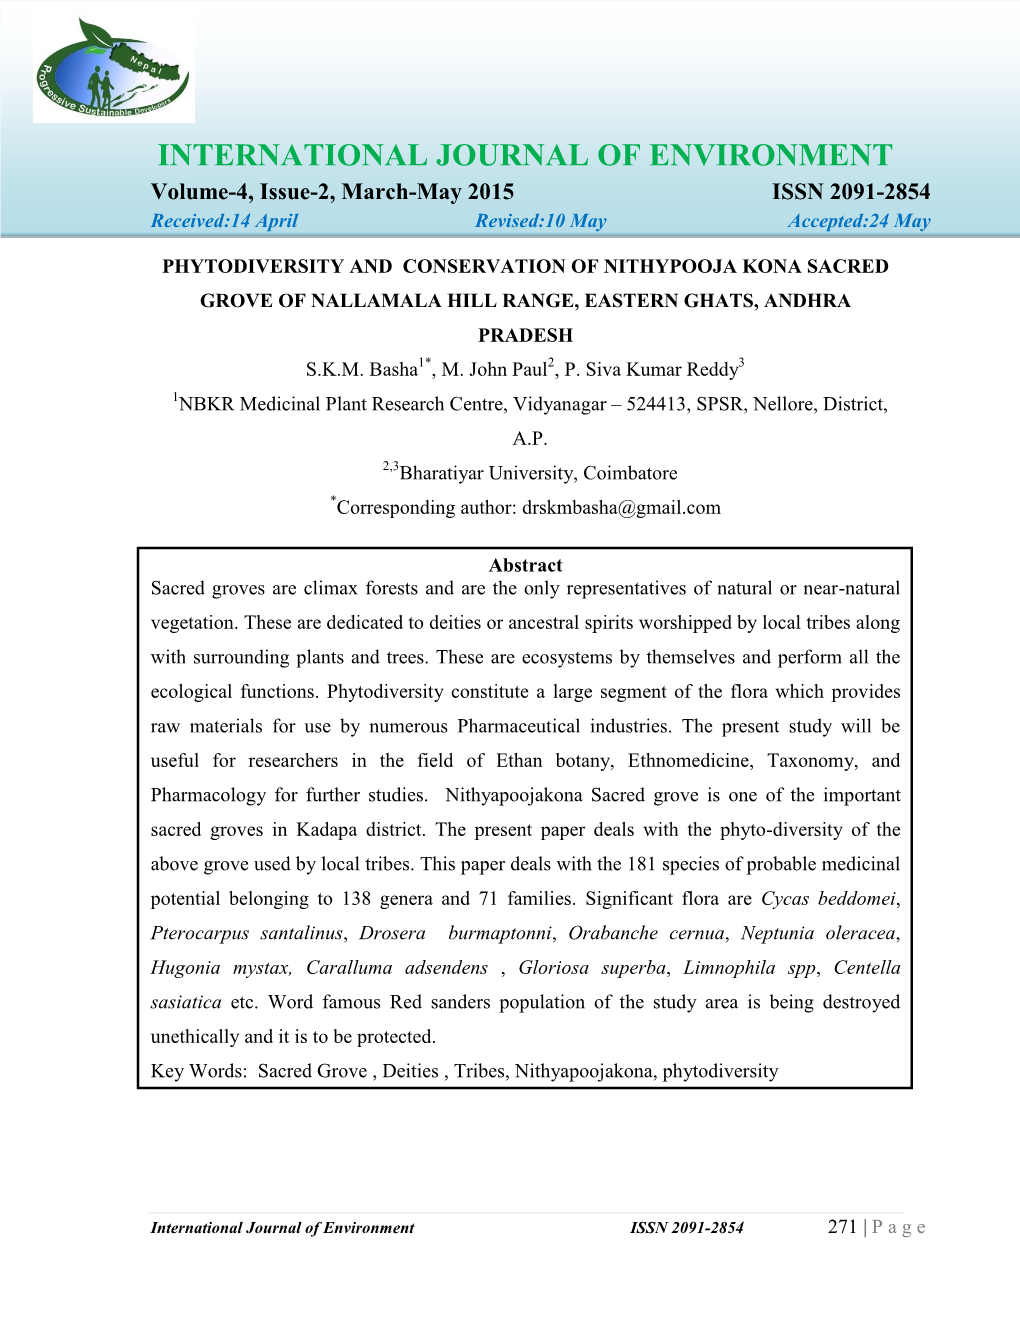 INTERNATIONAL JOURNAL of ENVIRONMENT Volume-4, Issue-2, March-May 2015 ISSN 2091-2854 Received:14 April Revised:10 May Accepted:24 May